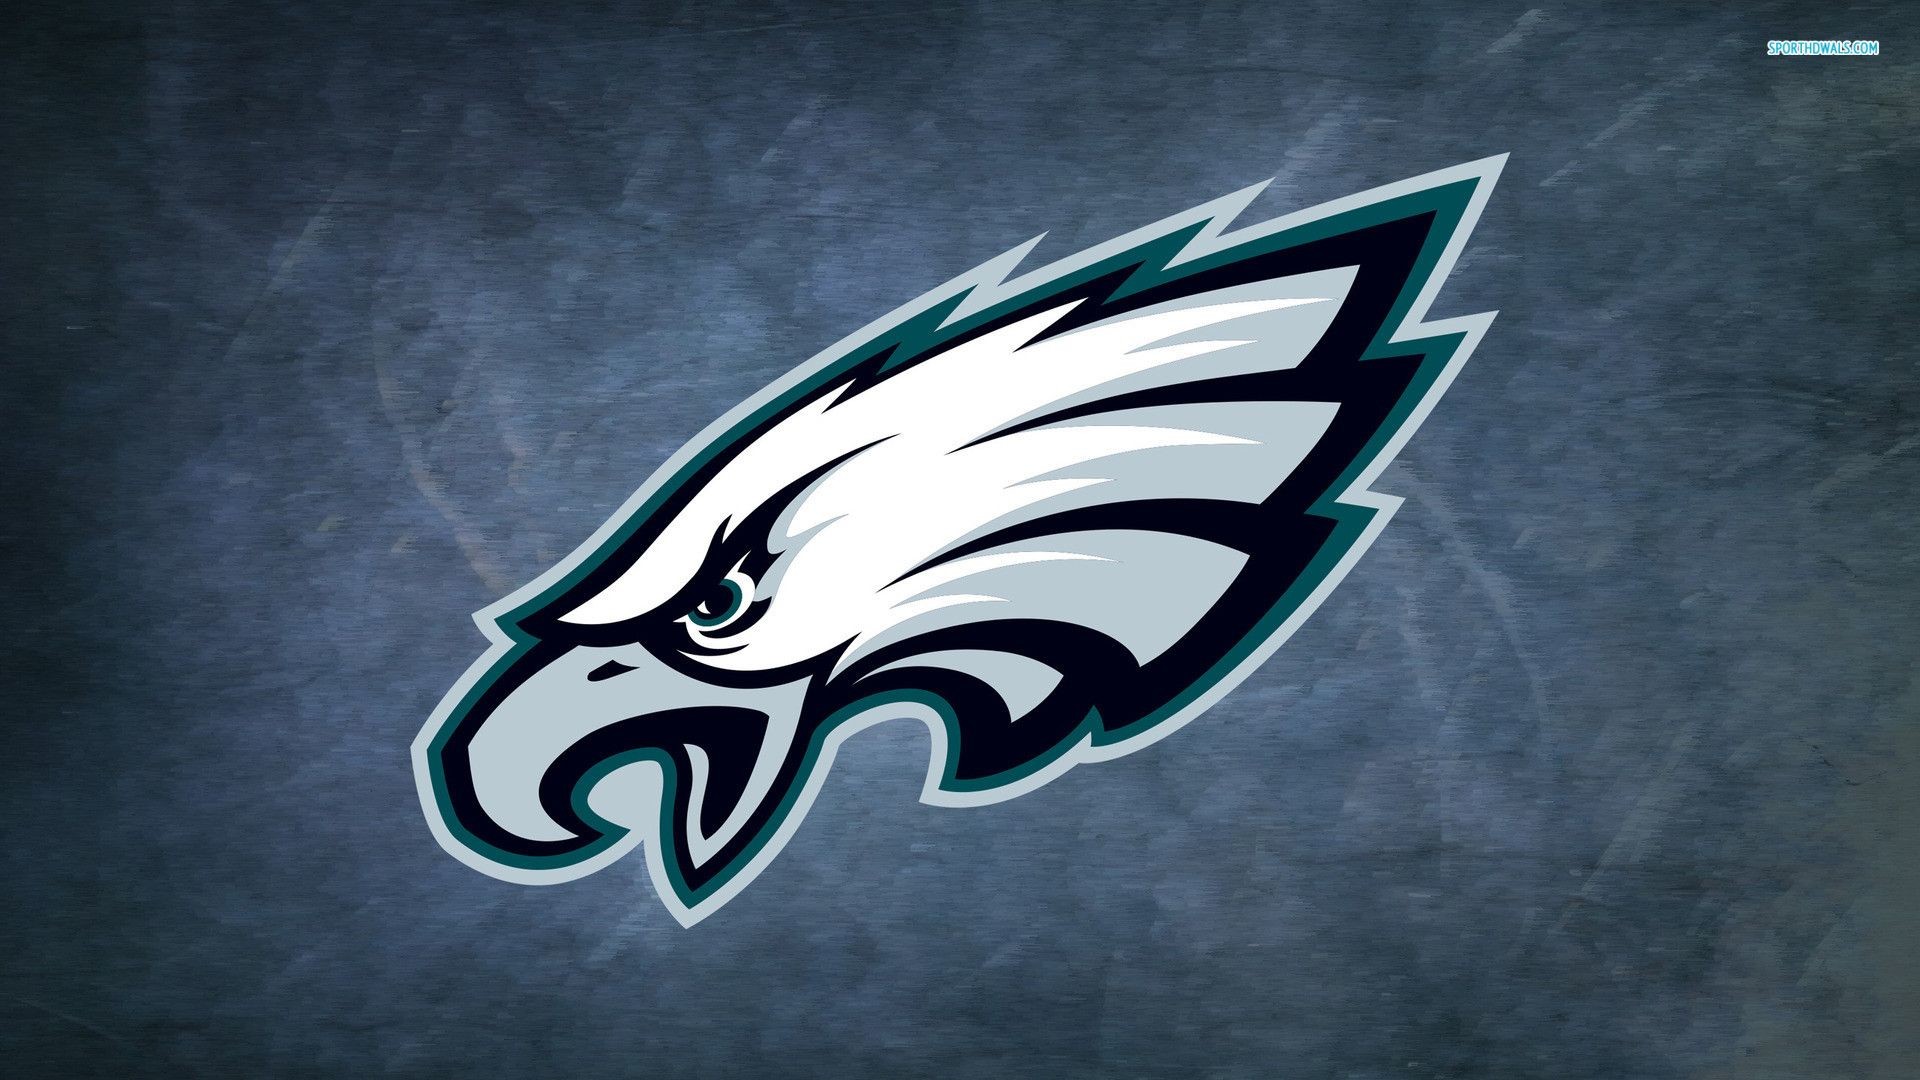 1920x1080 Philadelphia Eagles Wallpapers PC iPhone Android